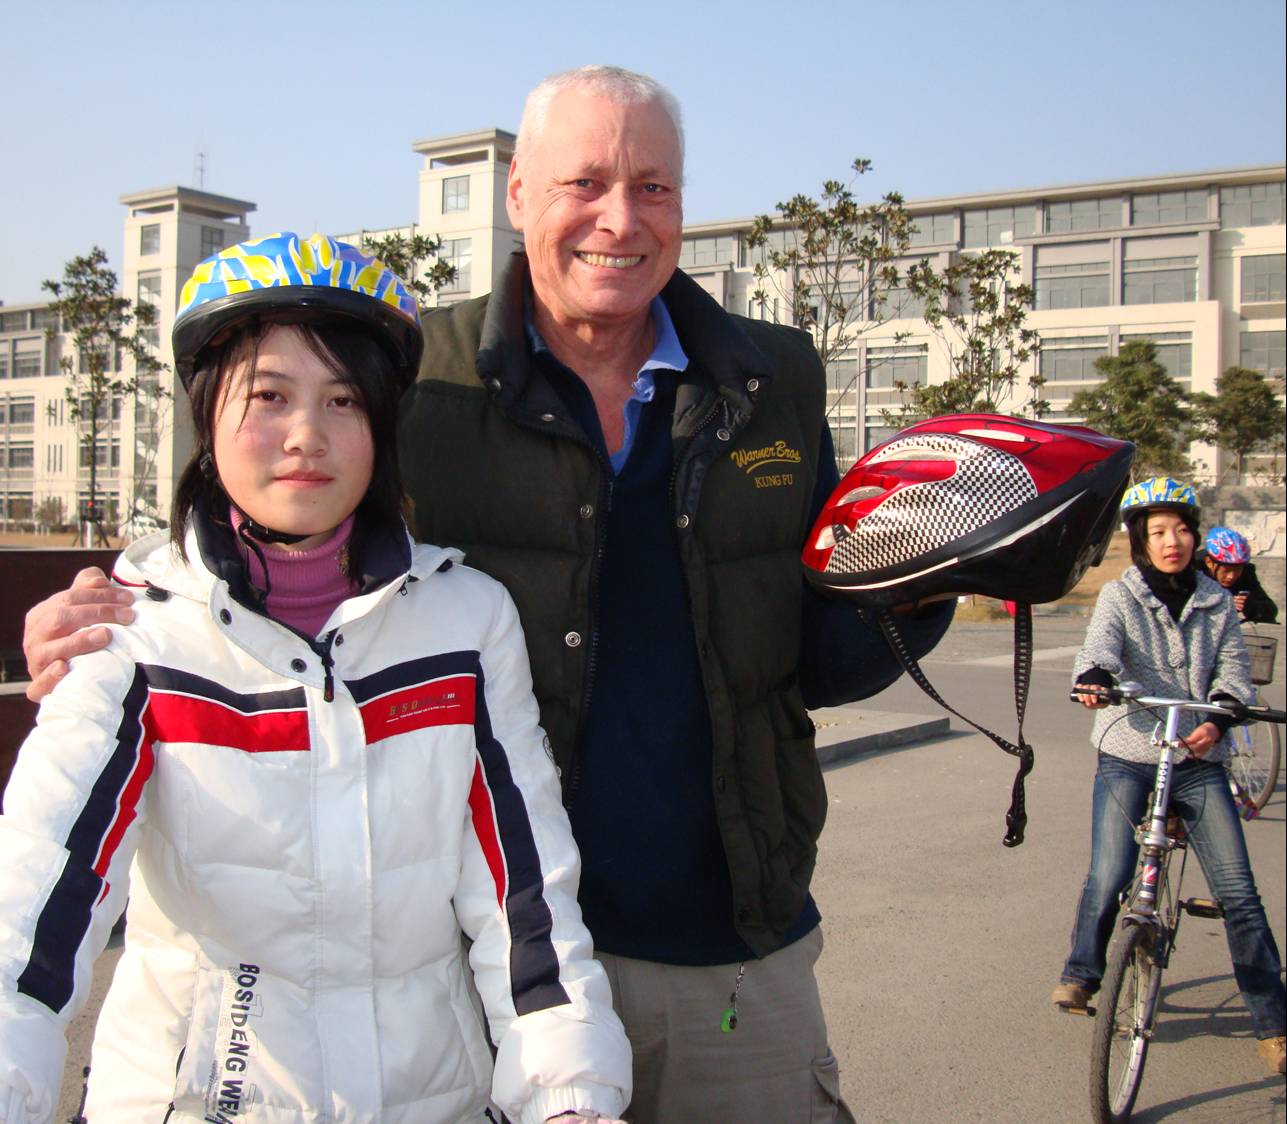 Click to see the article in the Yangze Evening Post. David Scott and student with bicycle helmet,  Jiangnan University,  Wuxi,  China